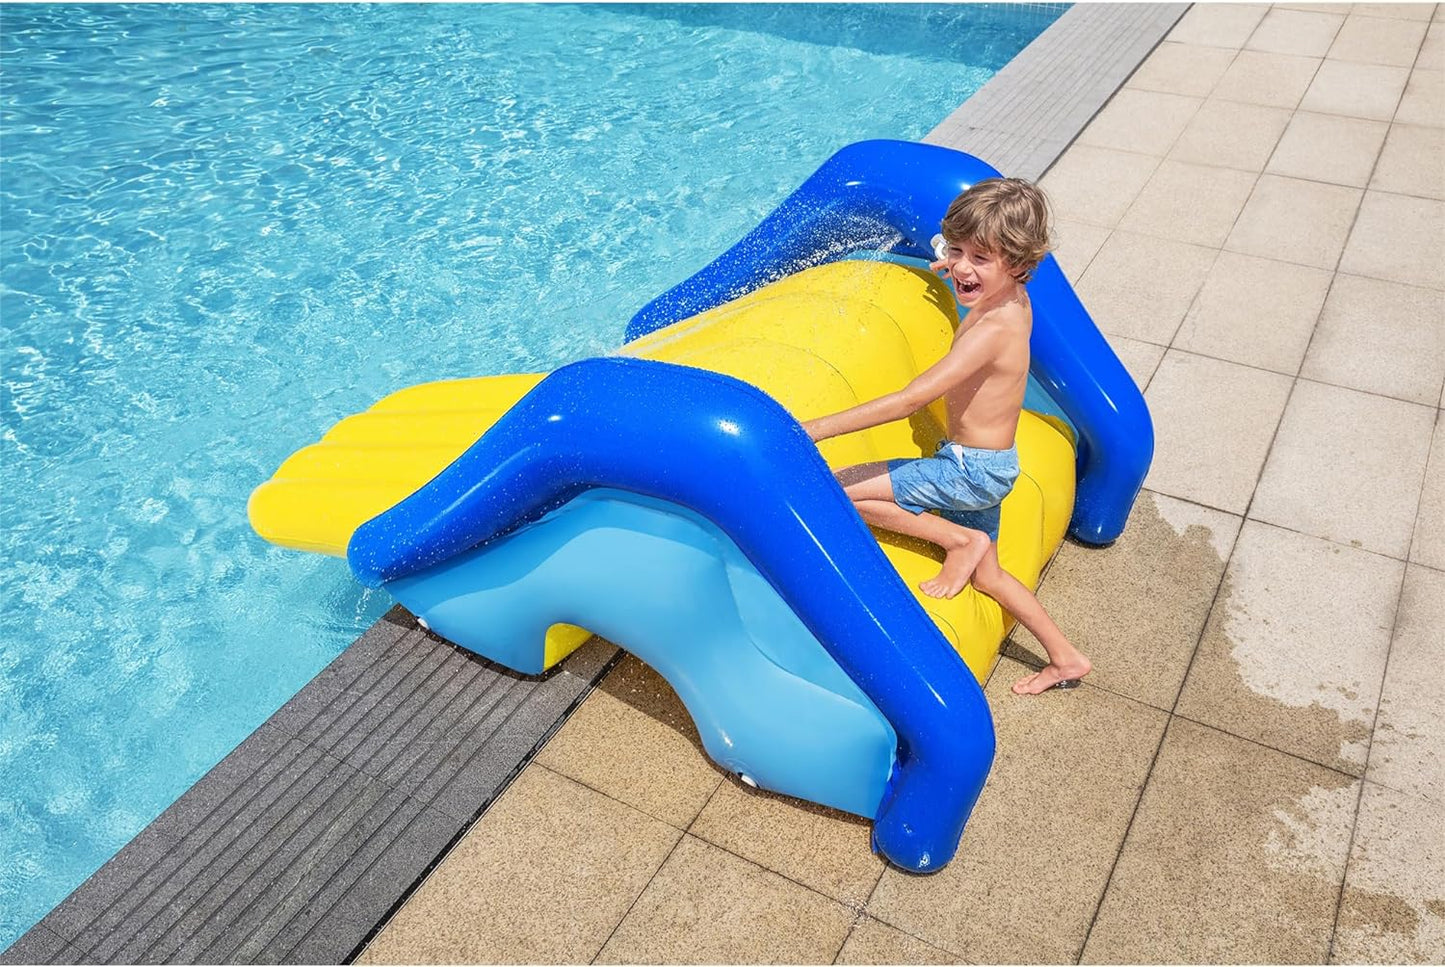 H2OGO! Giant Inflatable Outdoor Swimming Pool Water Slide with Built-In Sprinkler, Large Platform, and 4 Water Chambers for Stability